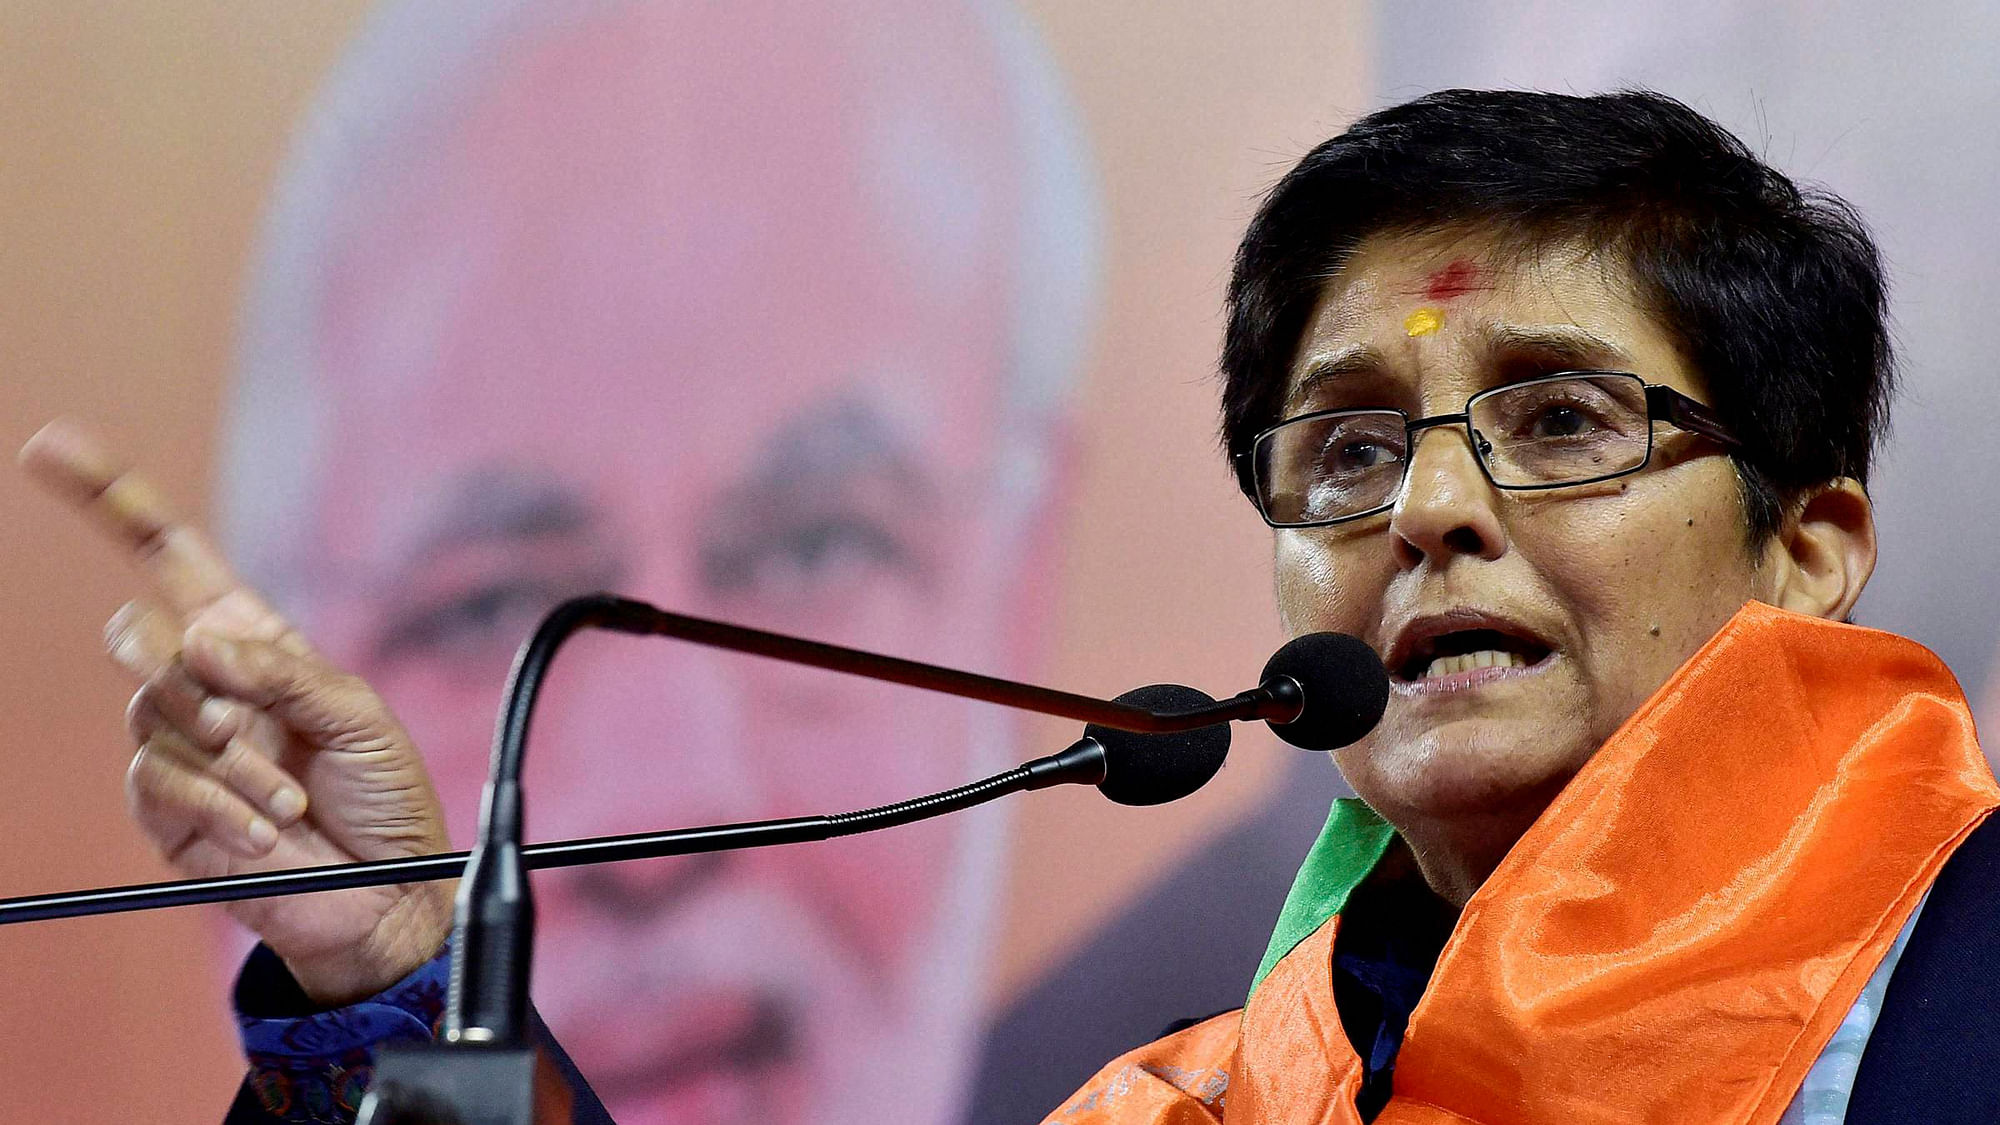 File photo of former IPS officer and current Puducherry Lt Governor, Kiran Bedi. (Photo: PTI)